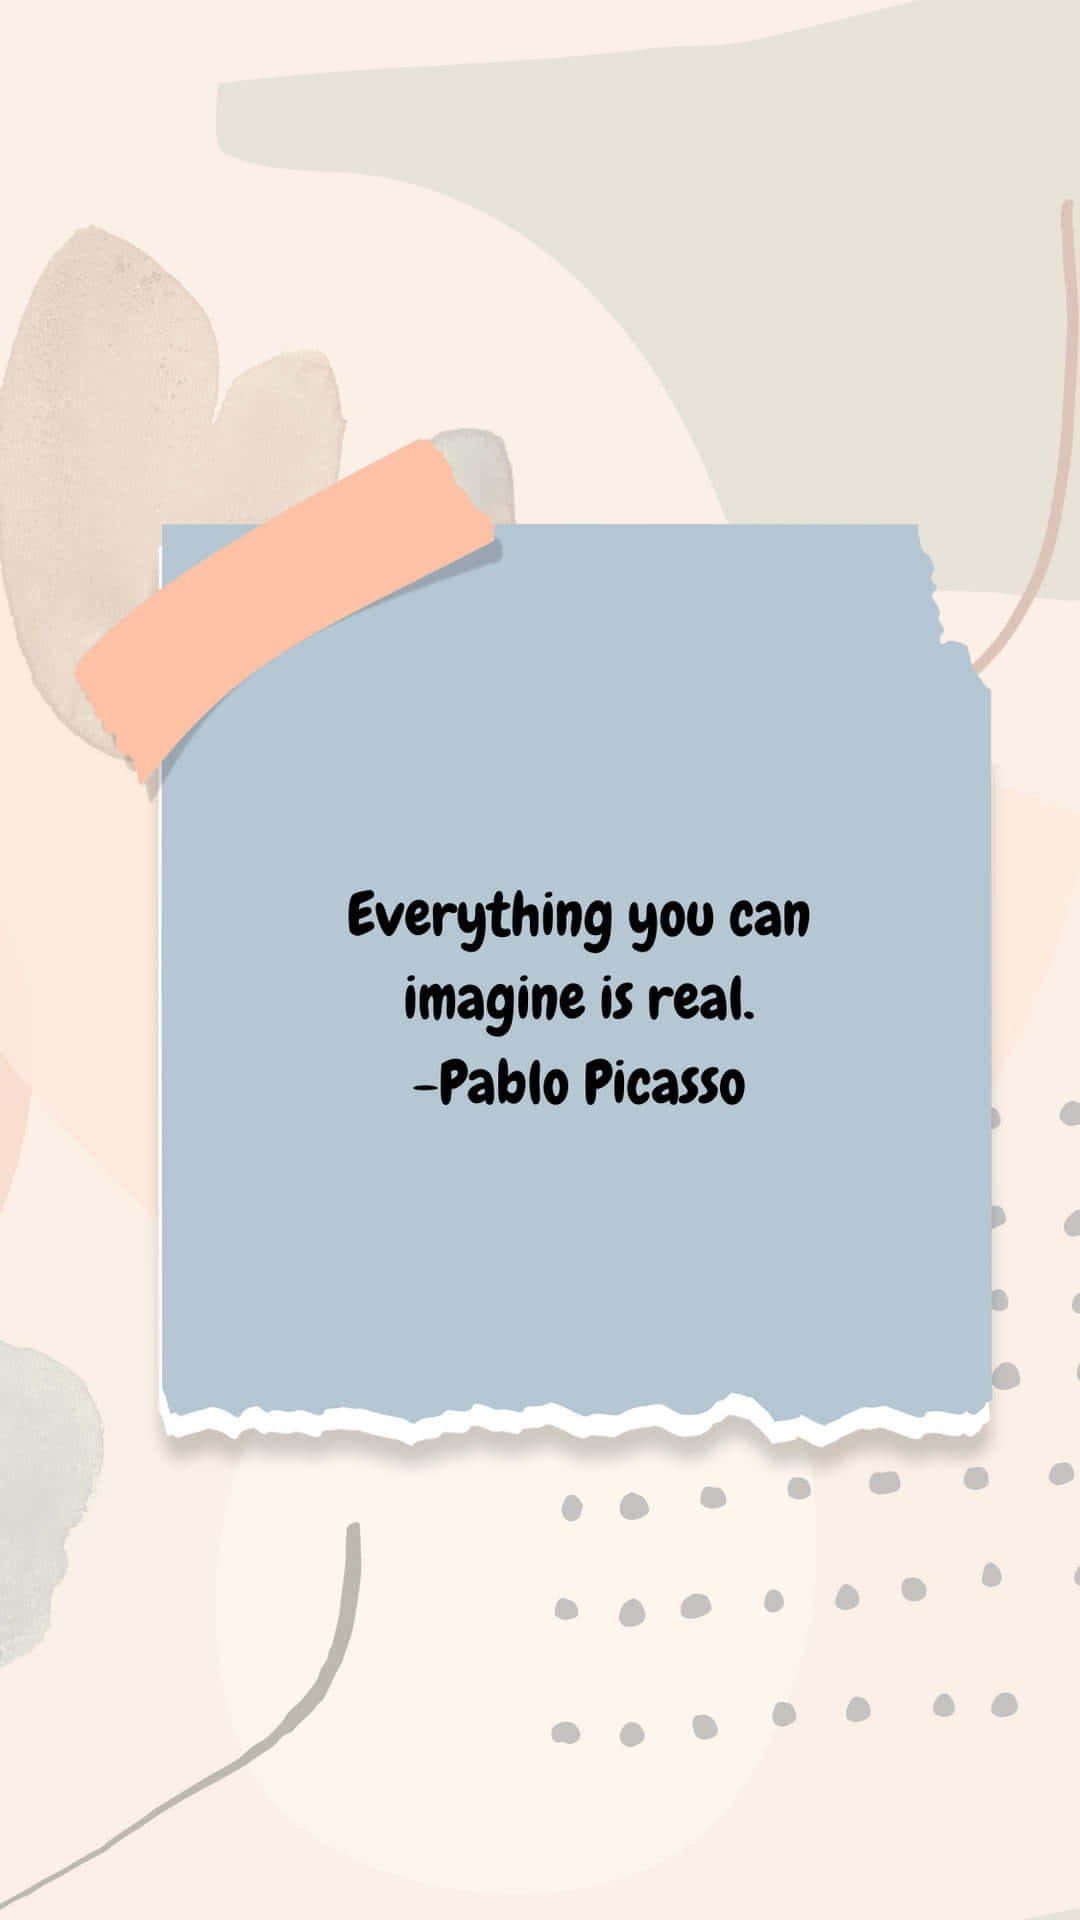 Picasso Inspiration Quote Aesthetic.jpg Wallpaper